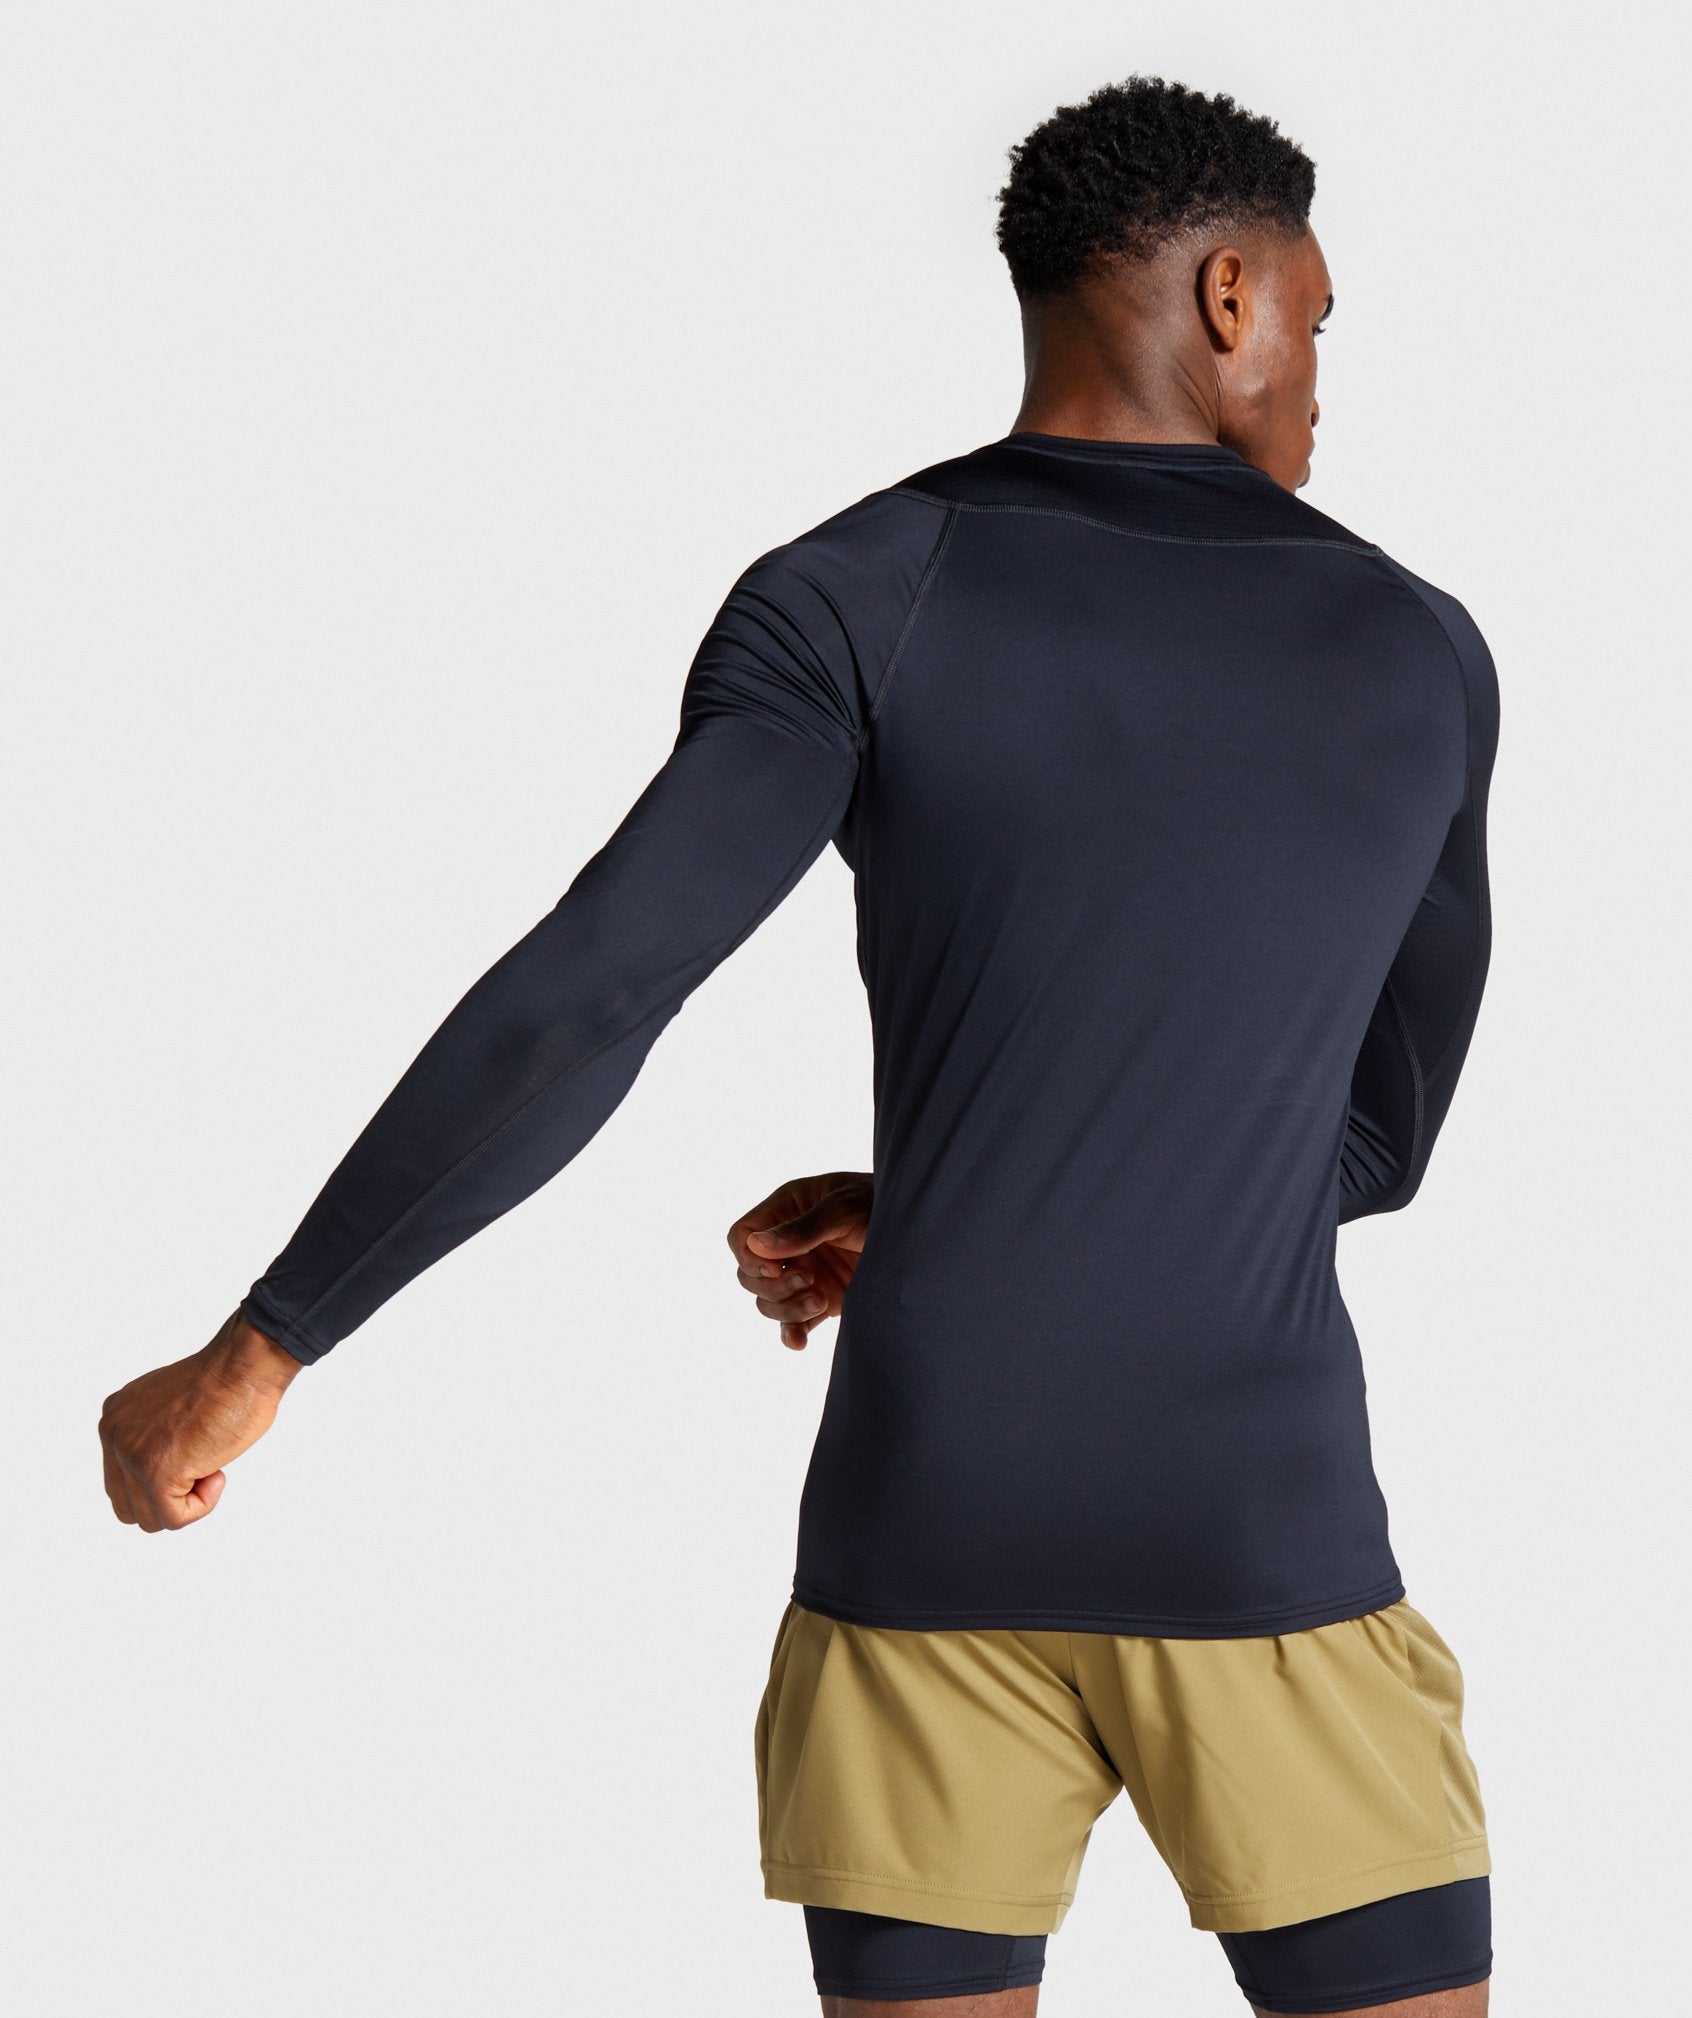 Element Baselayer Long Sleeve T-Shirt in Black - view 2